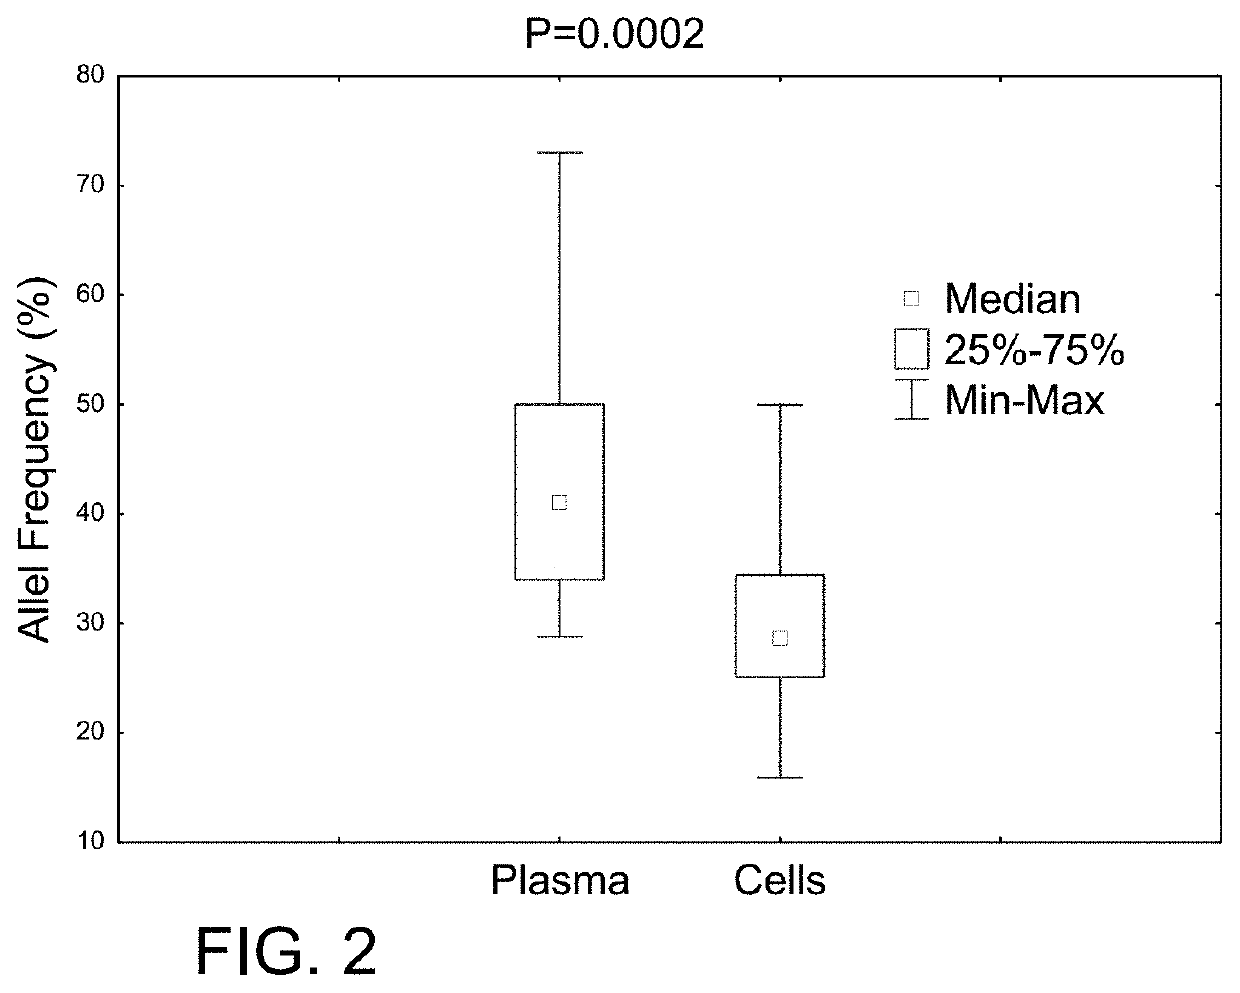 Determining tumor load and biallelic mutation in patients with CALR mutation using peripheral blood plasma